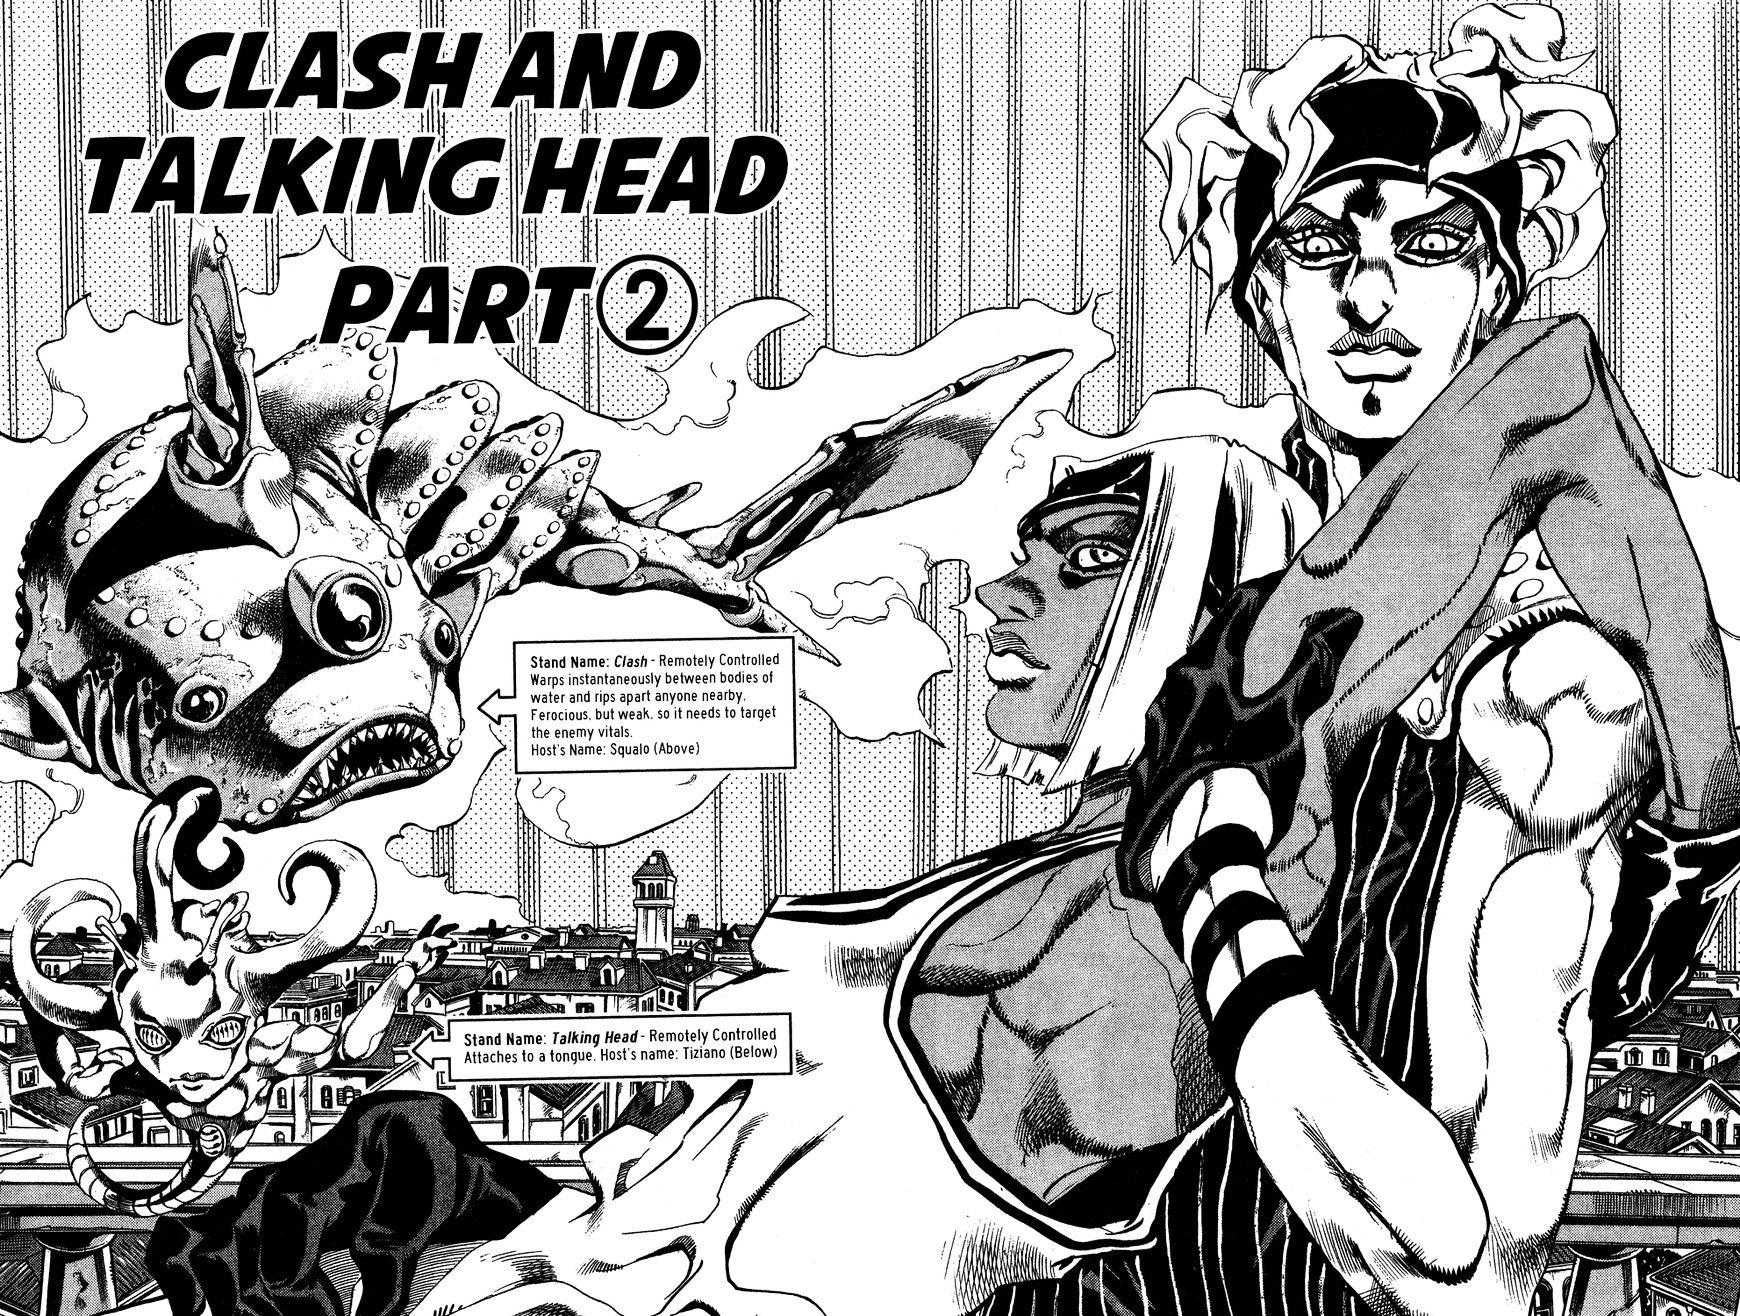 Jojo's Bizarre Adventure Vol.56 Chapter 526 : Clash And Taking Head - Part 2 page 3 - 